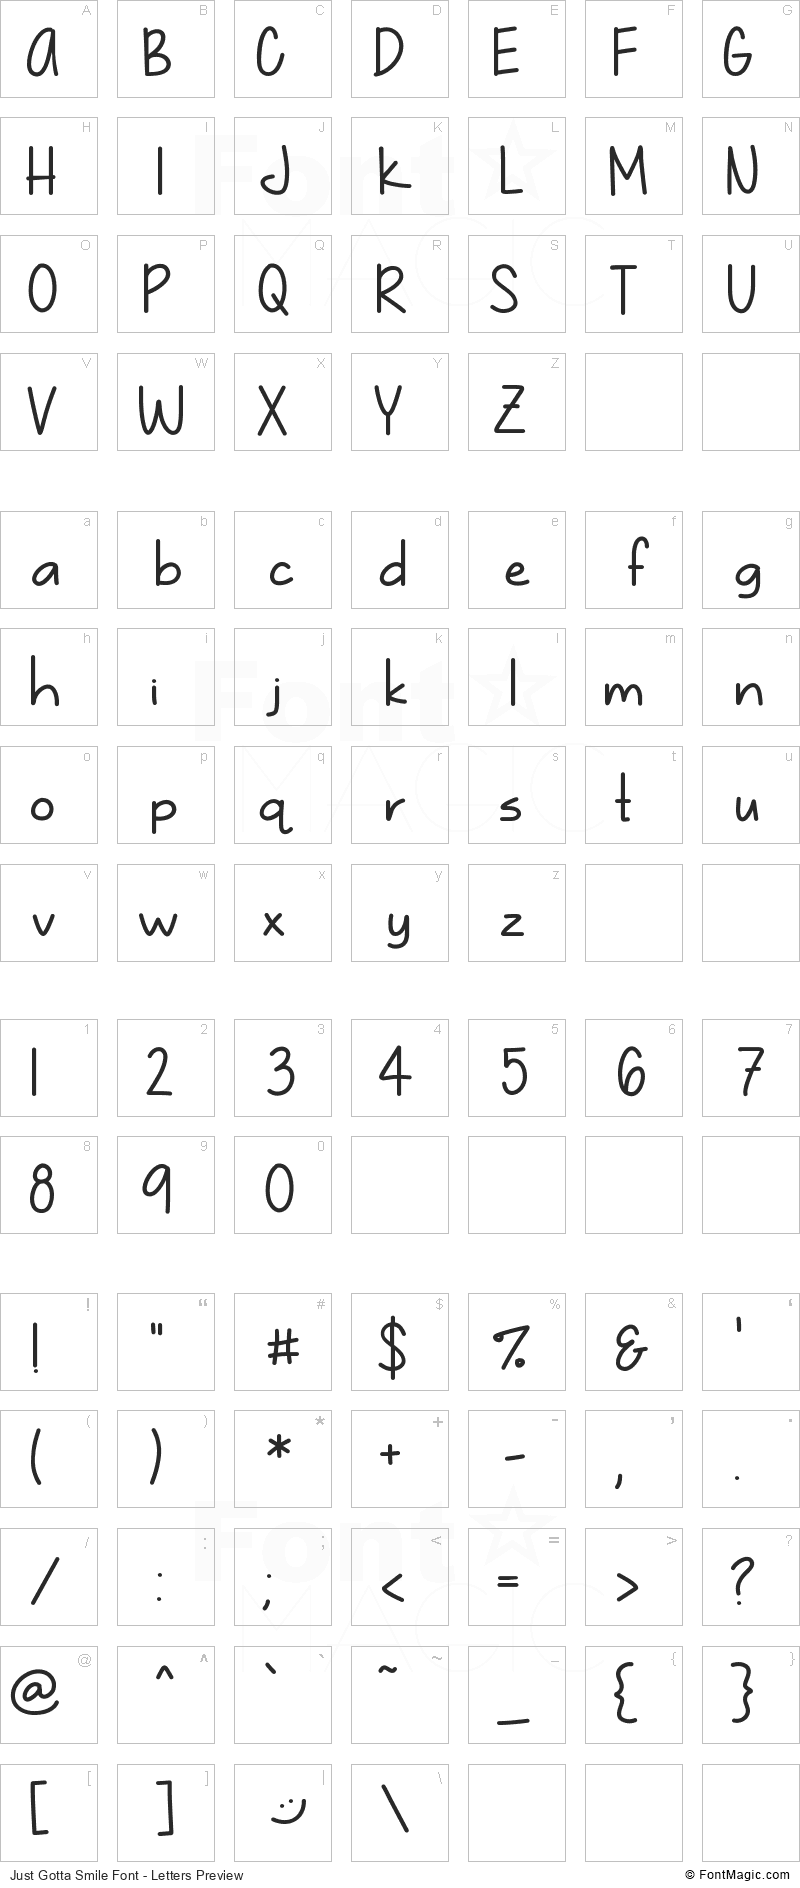 Just Gotta Smile Font - All Latters Preview Chart